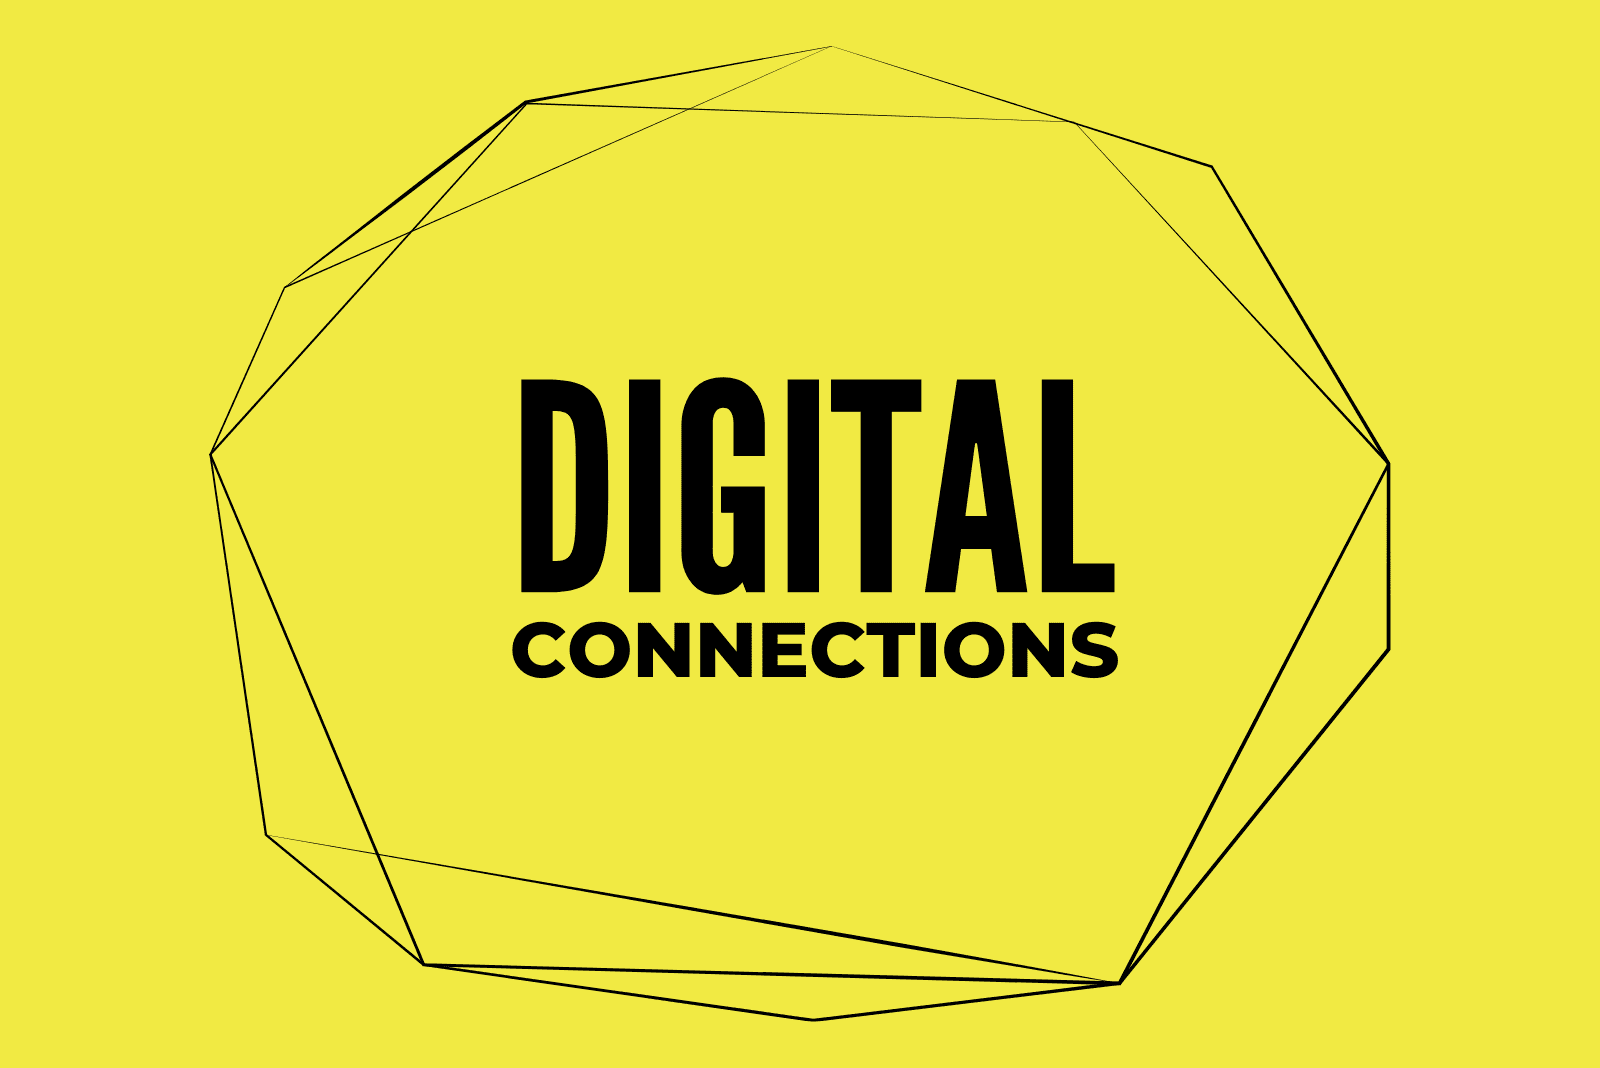 Digital Connections logo on yellow background